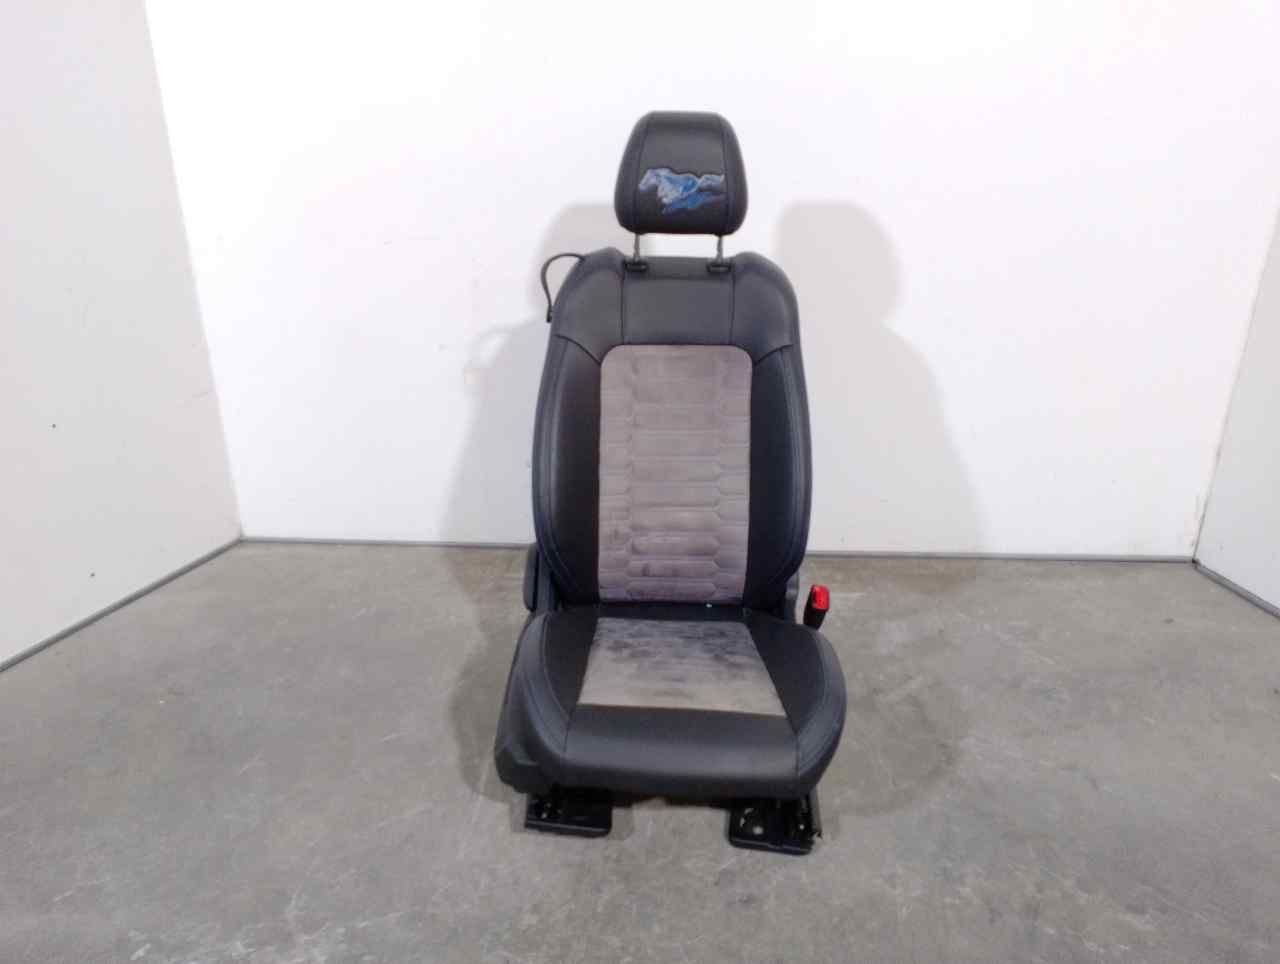 FORD USA Mustang 6 generation (2014-2024) Front Right Seat 4775409, CUEROYTELA, 2PUERTAS 24155018